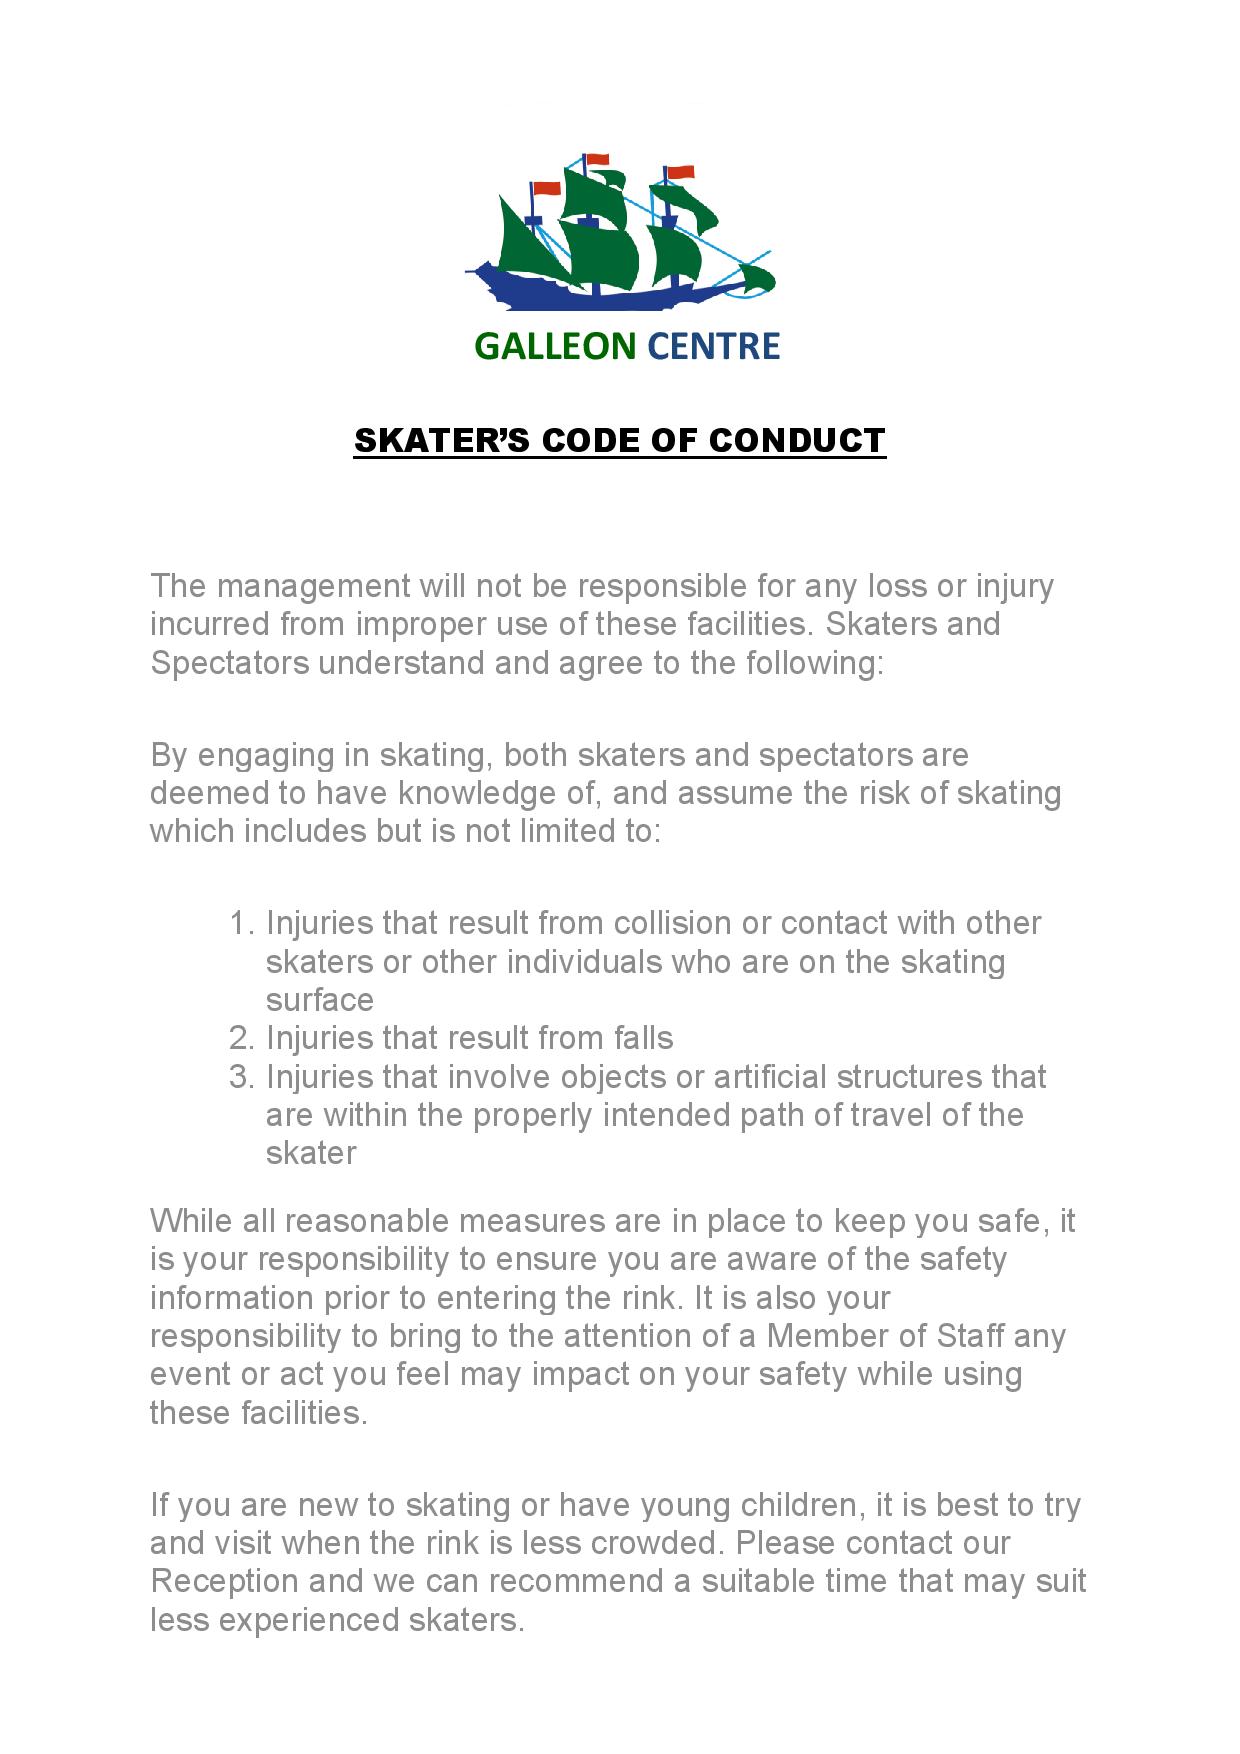 SKATER CODE OF CONDUCT Page 1